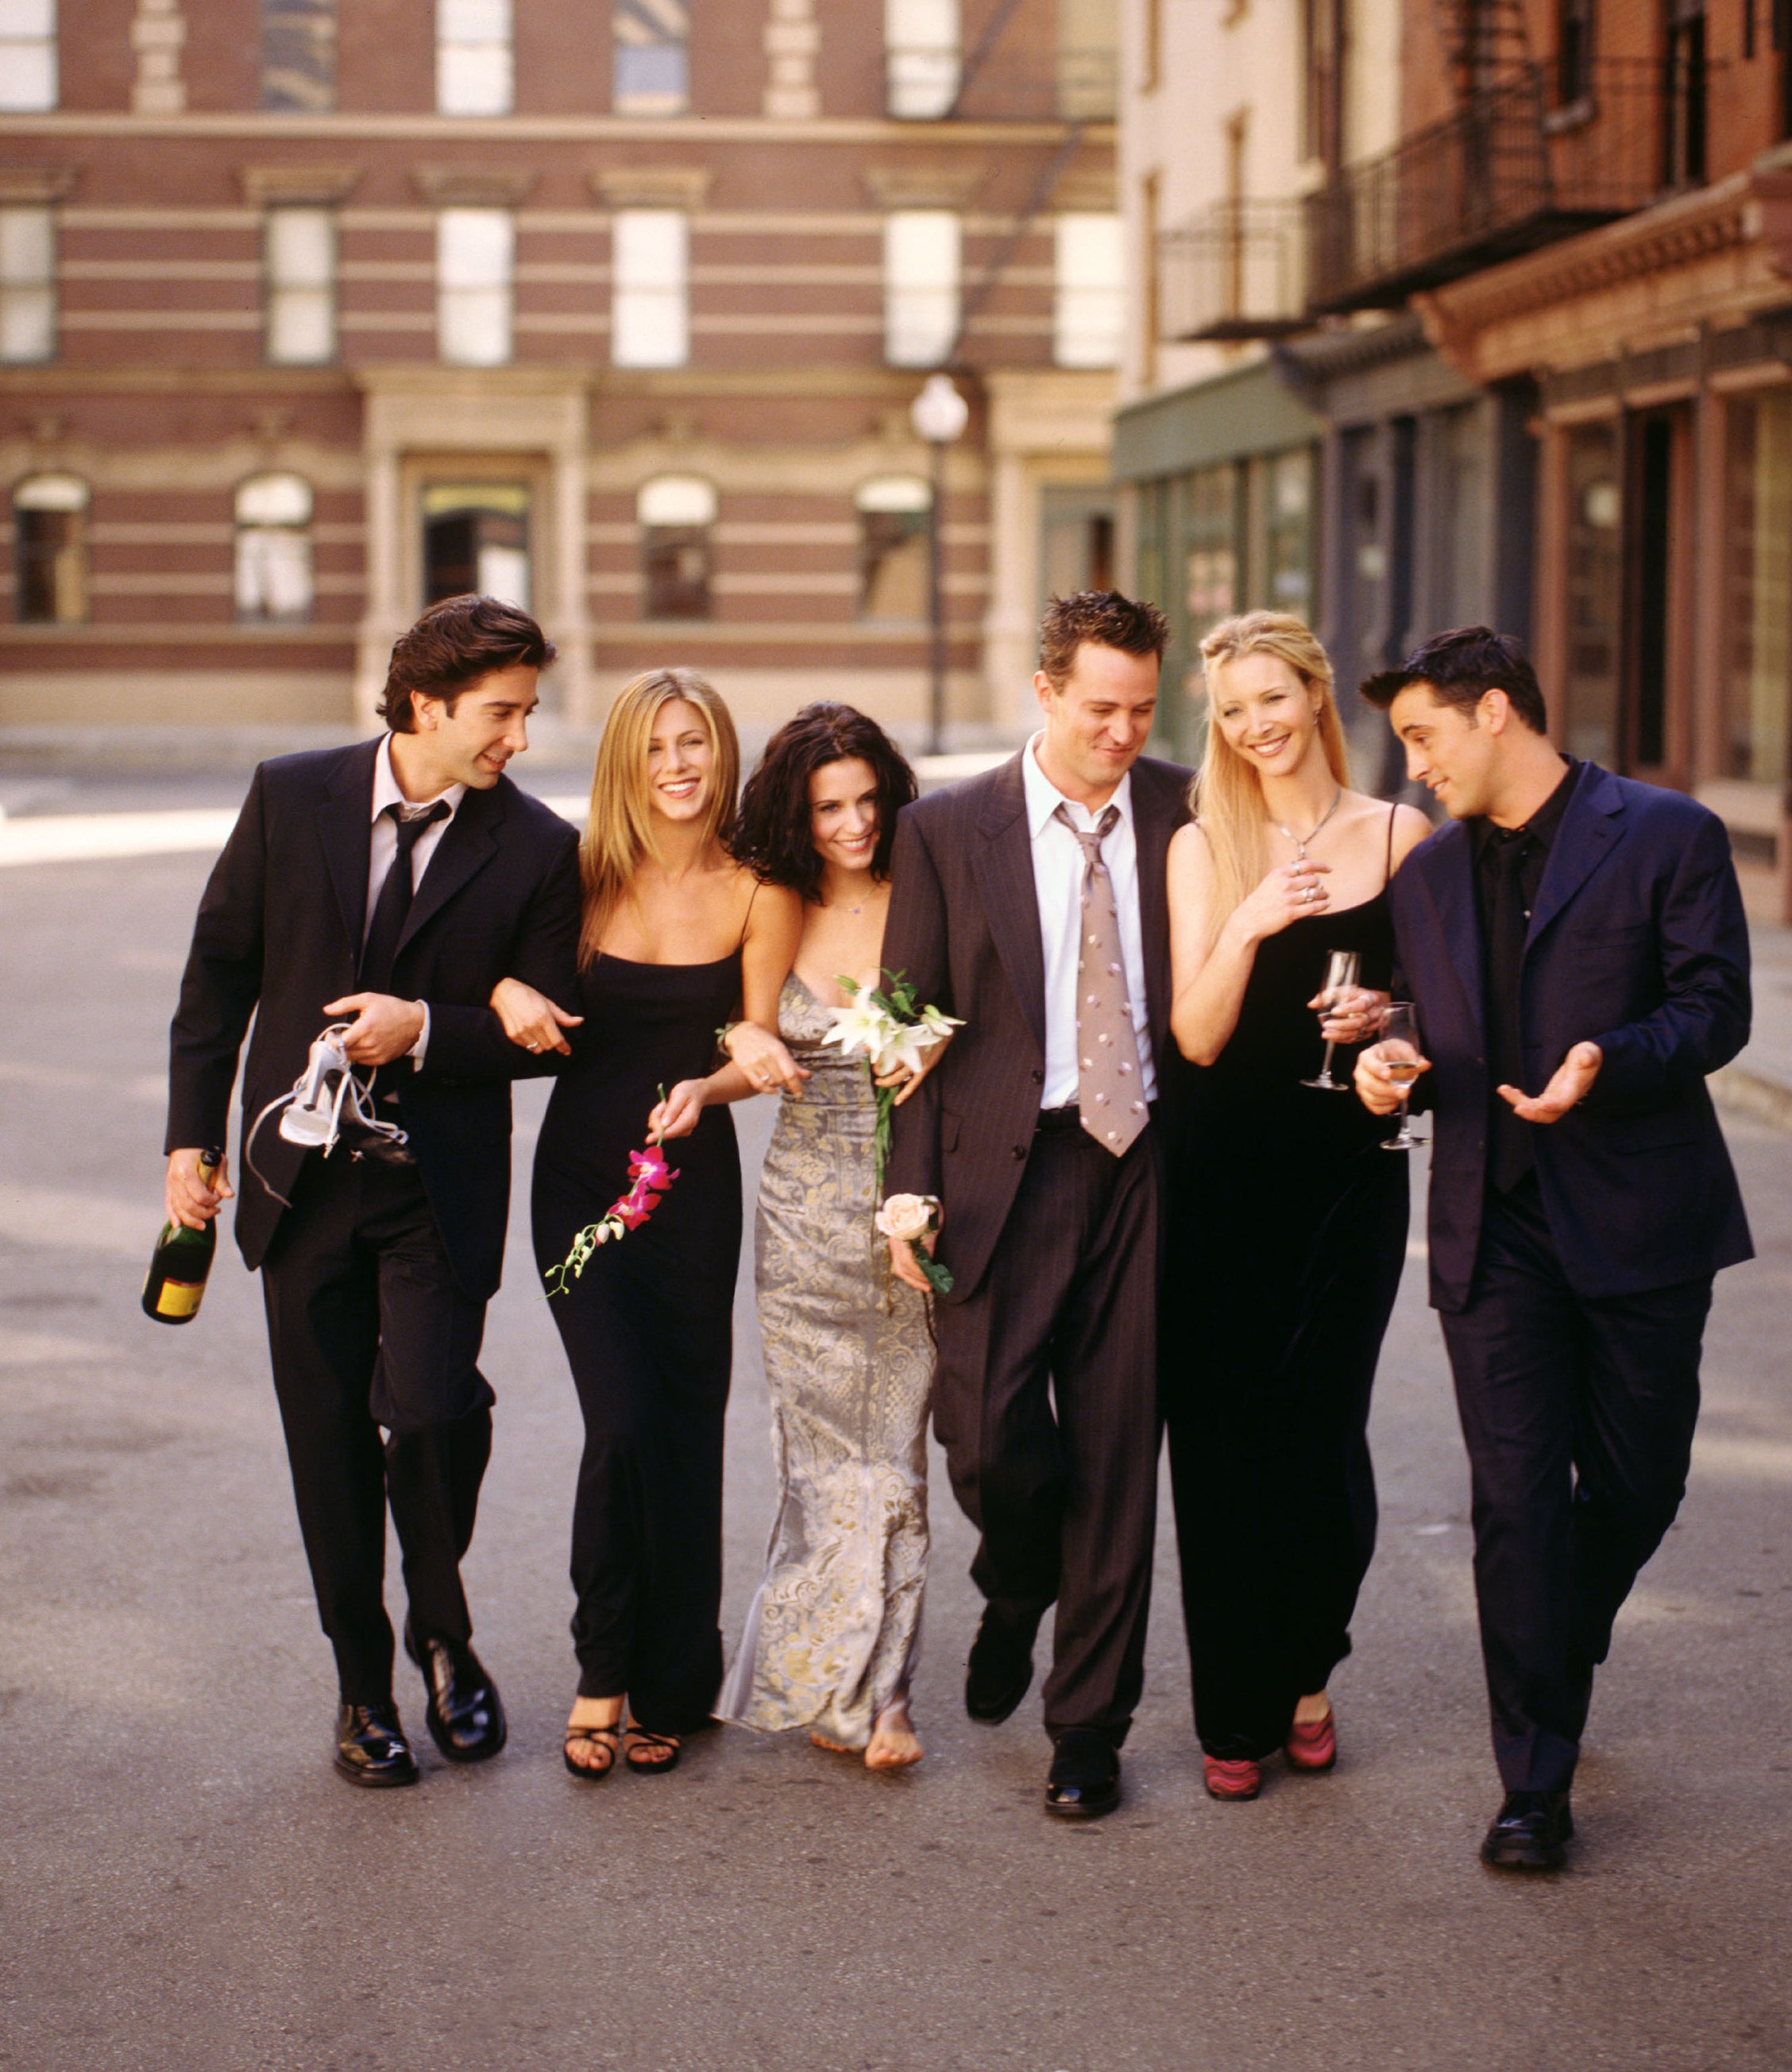 The cast of &quot;Friends&quot; walking down the street